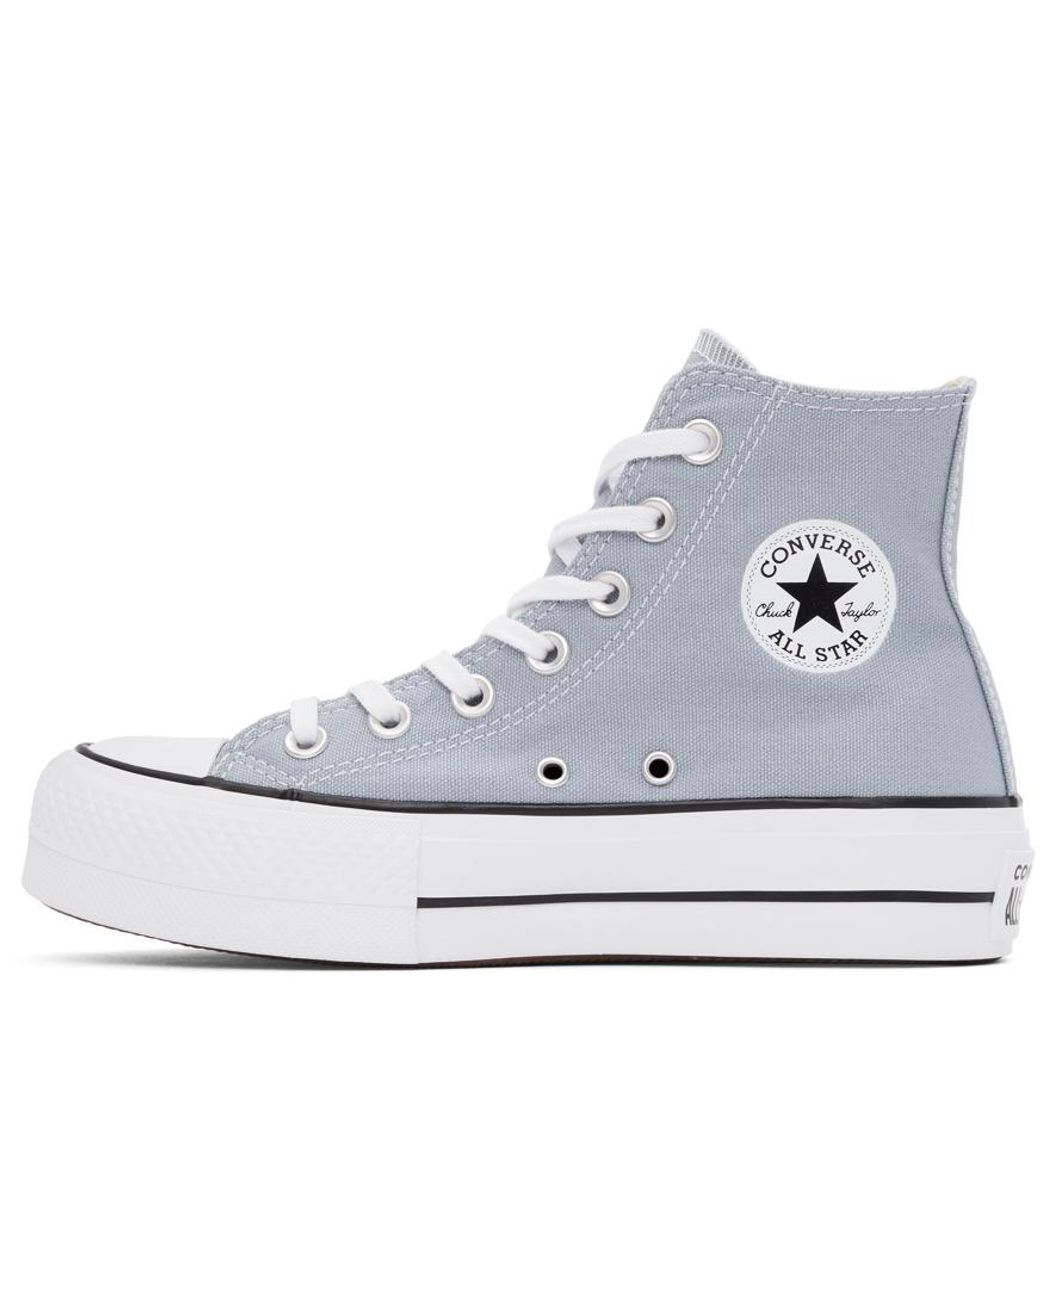 Converse Grey Chuck Taylor All Star Lift High Sneakers in Grey | Lyst UK